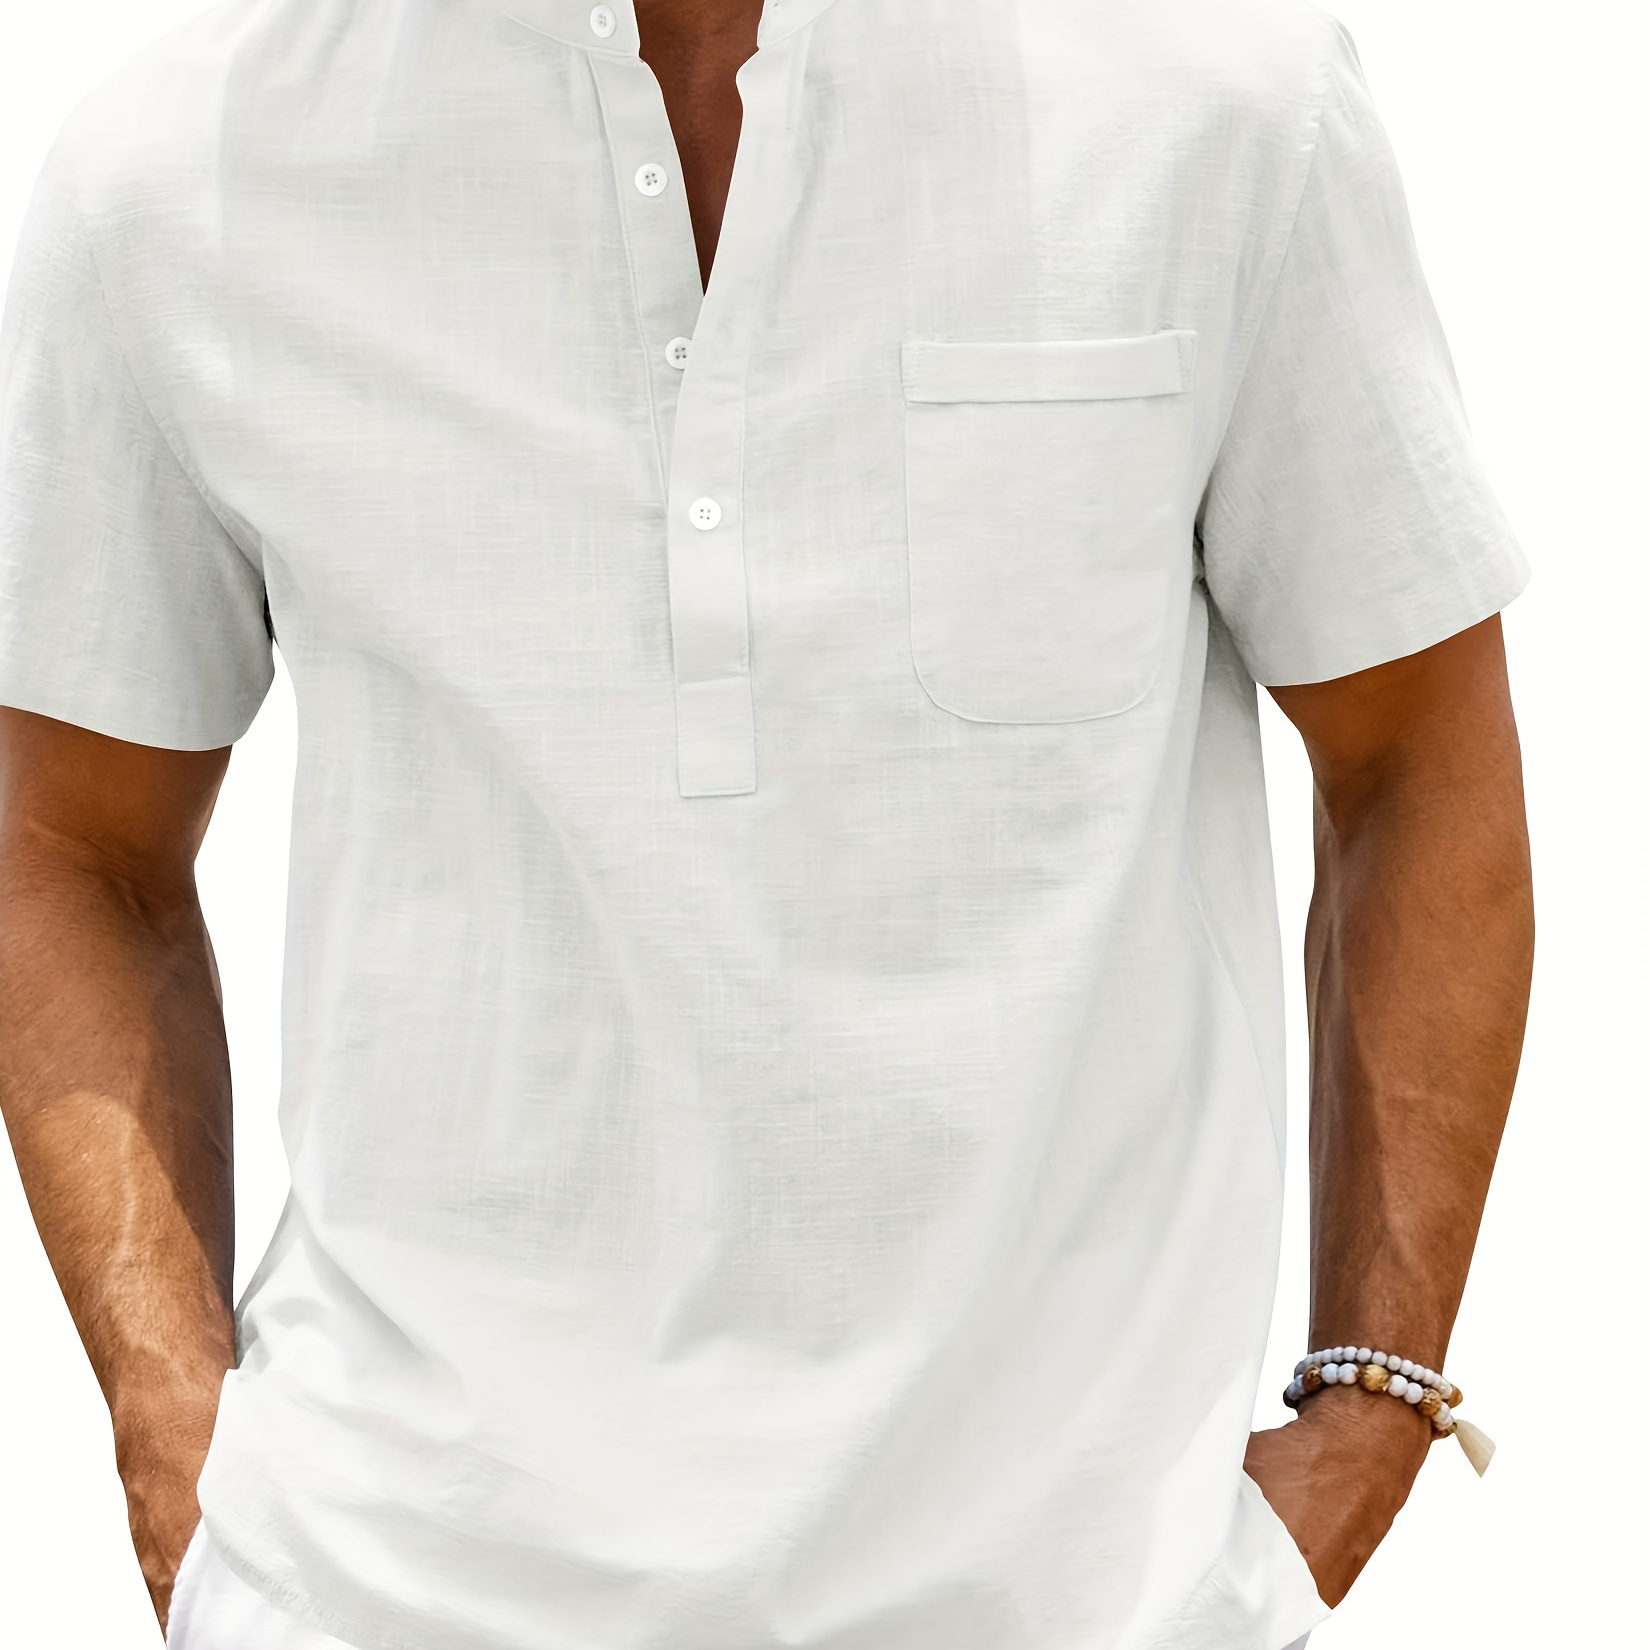 

Men's Solid Henley Shirt With Chest Pocket, Casual Stand Collar Slim-fit Short Sleeve Shirt For Summer Outdoor Activities